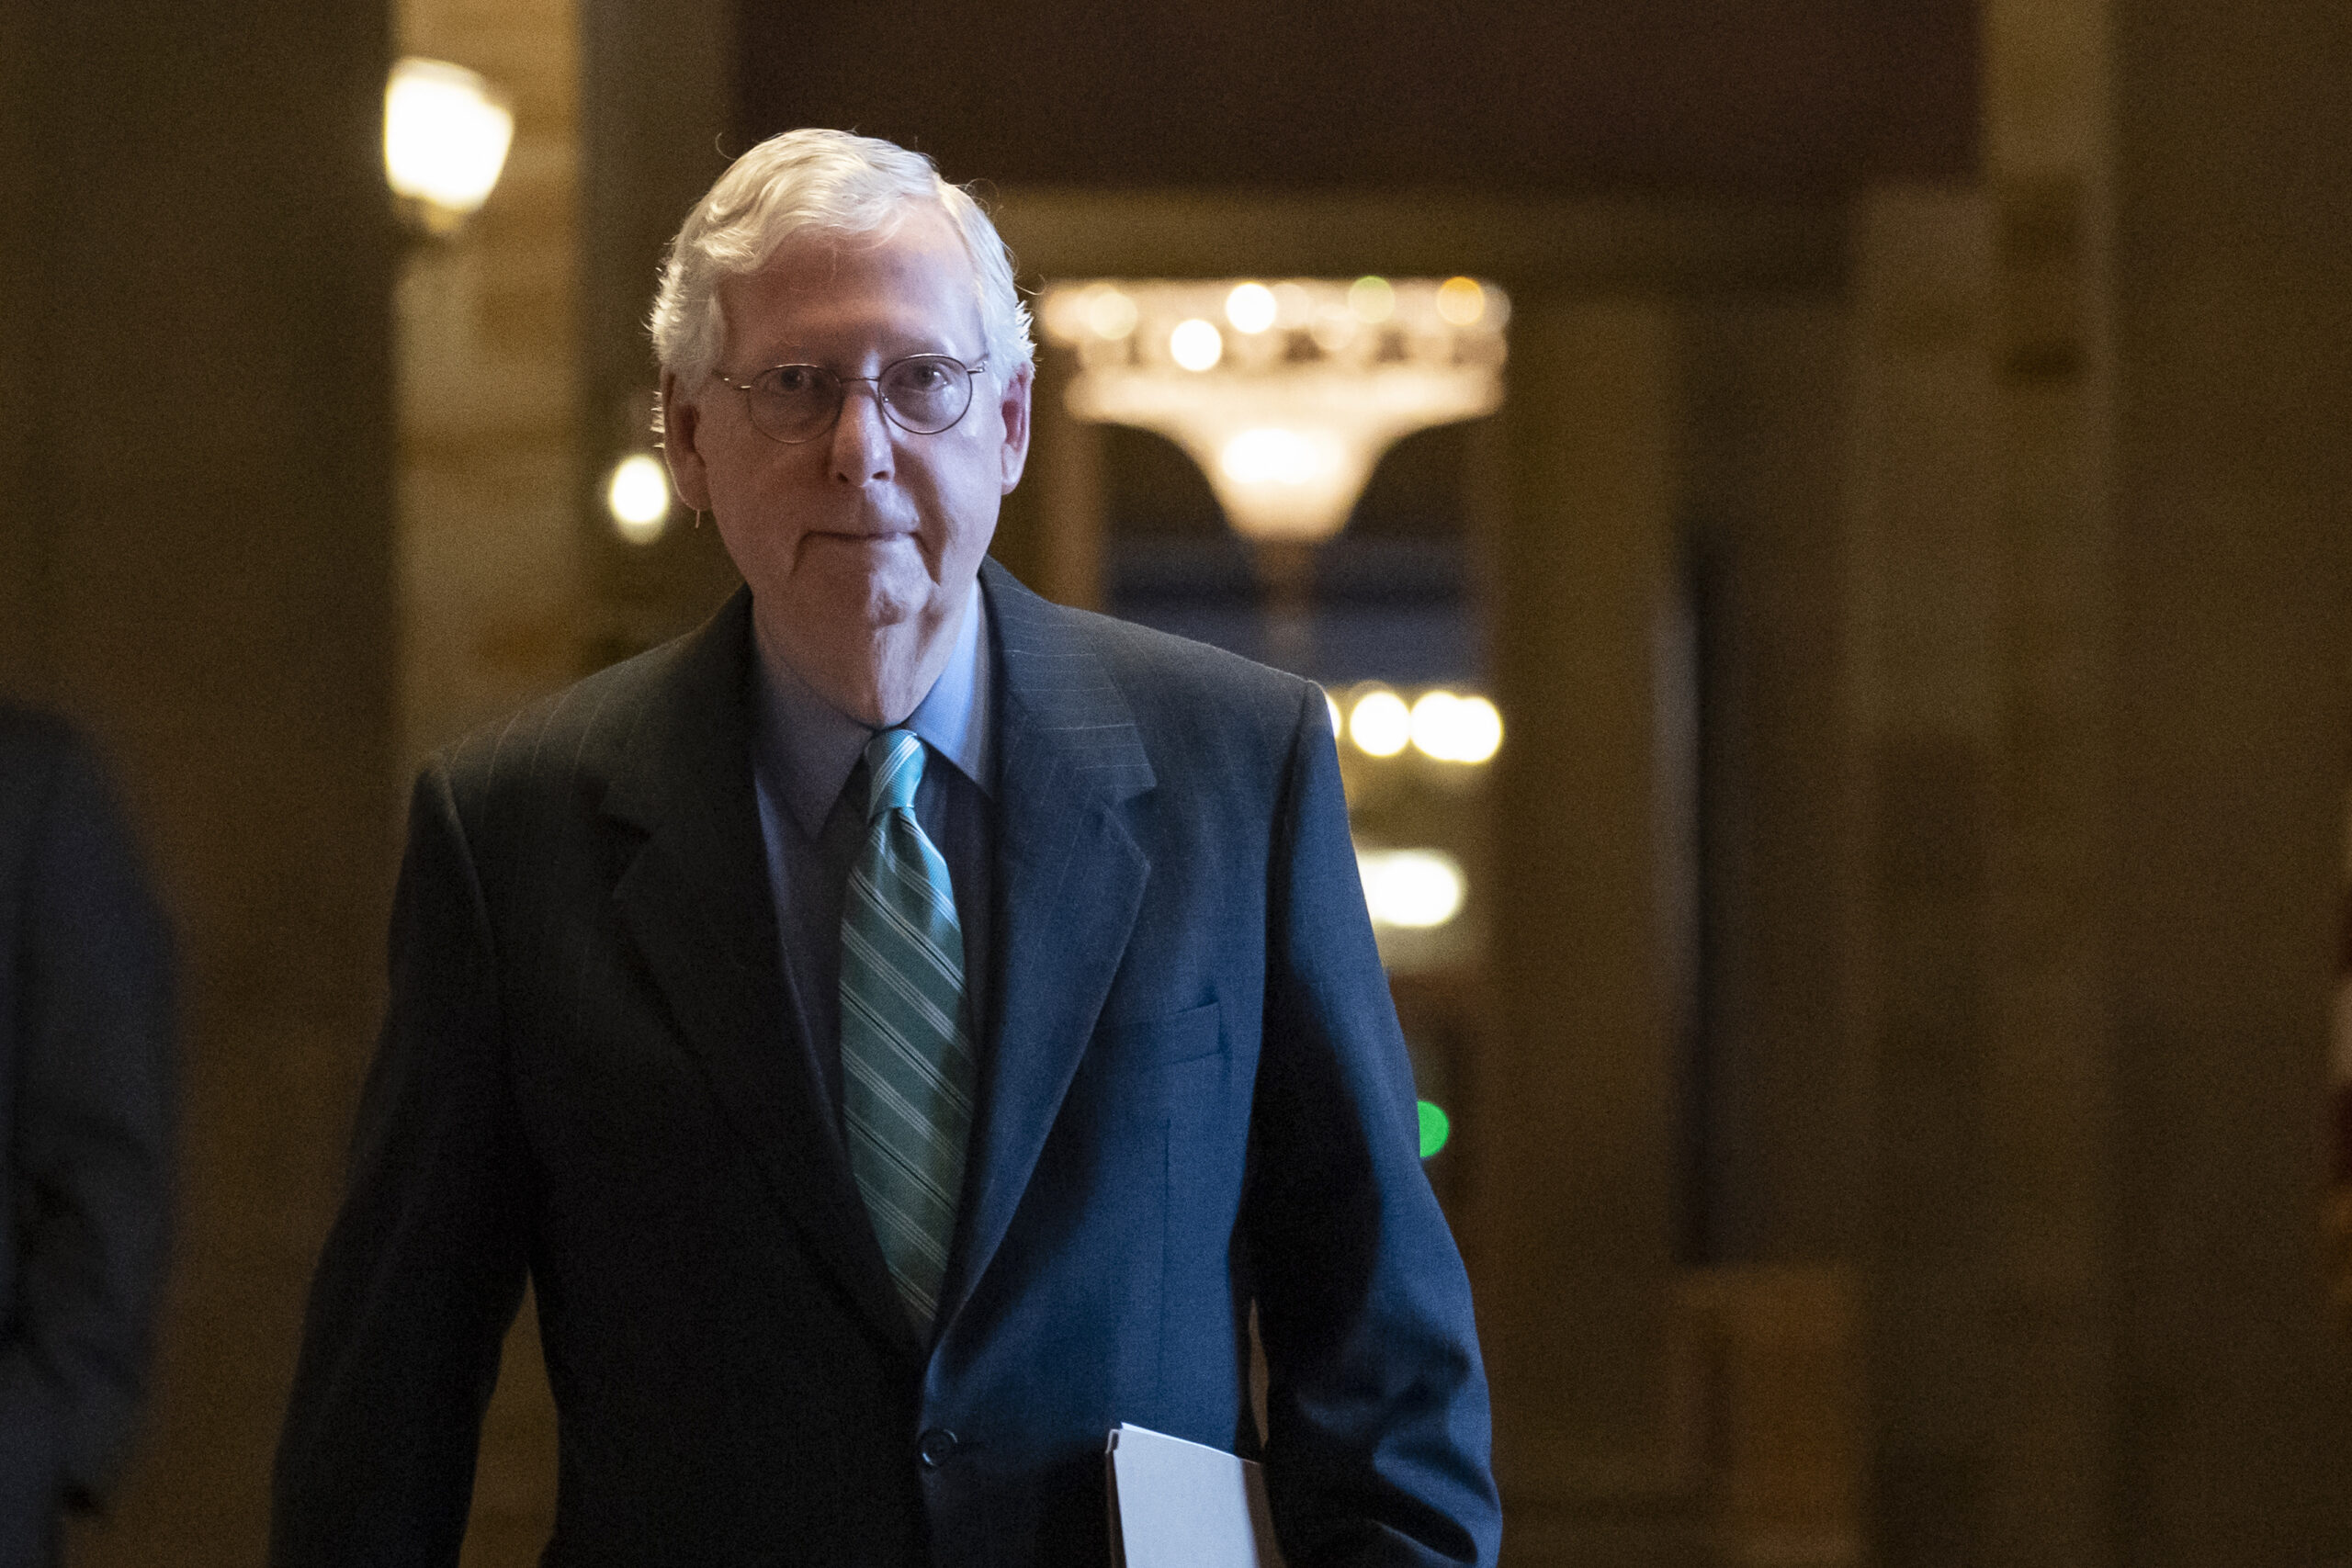 Senate Minority Leader Mitch McConnell, R-Ky., leaves the chamber after speaking, at the Capitol in Washington, Thursday, Oct. 7, 2021. Republican and Democratic senators have edged back from a perilous standoff over lifting the nation's borrowing cap and will likely extend the deadline until December. (AP Photo/Alex Brandon)